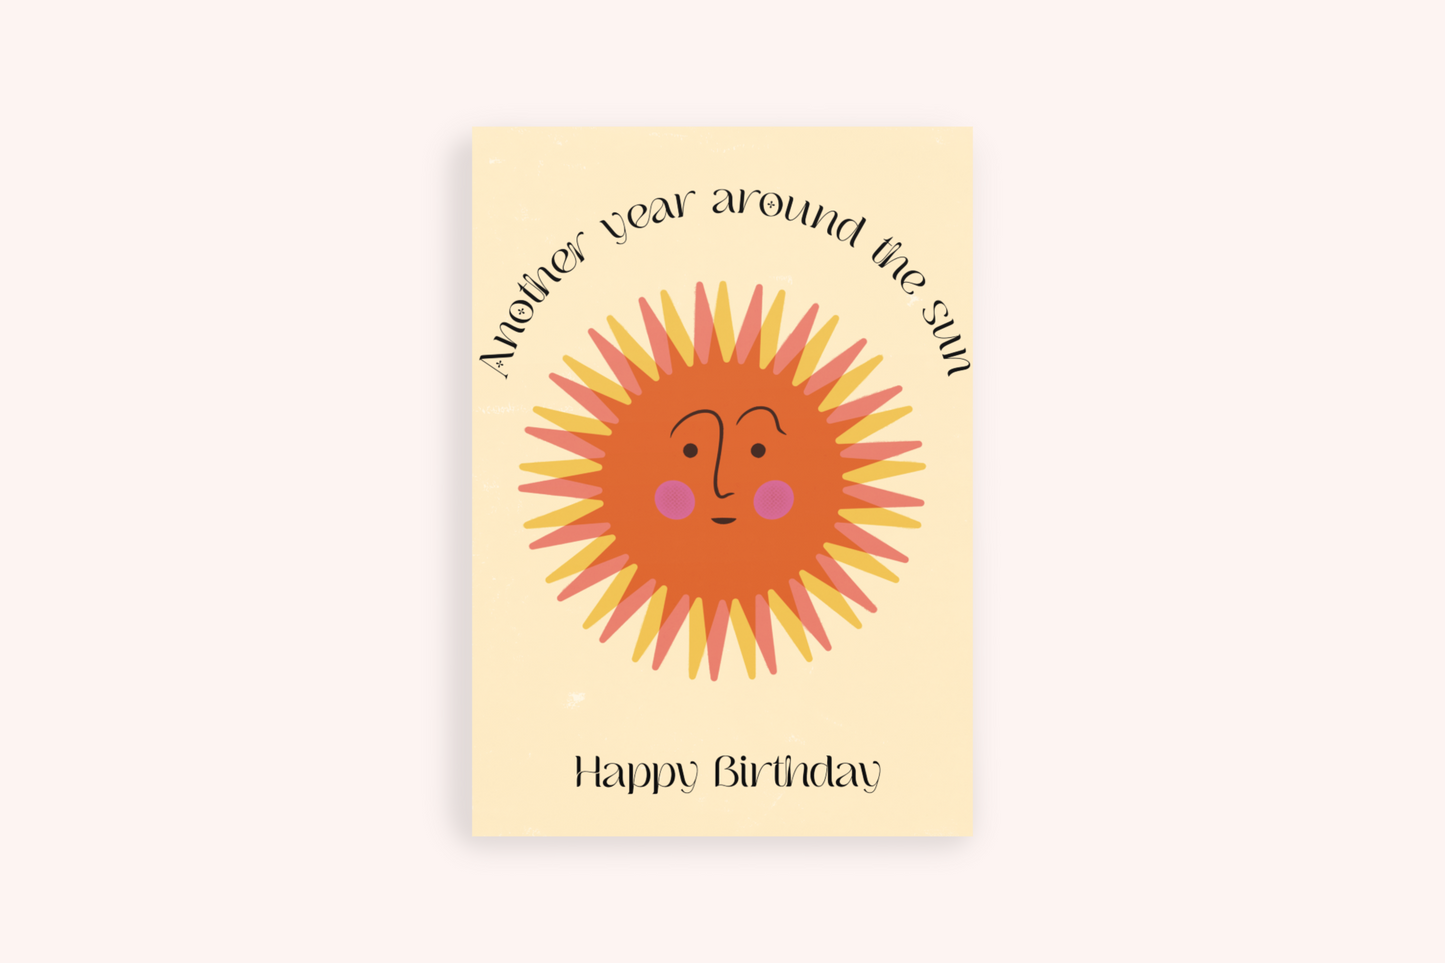 Another Year Around The Sun Greeting Card